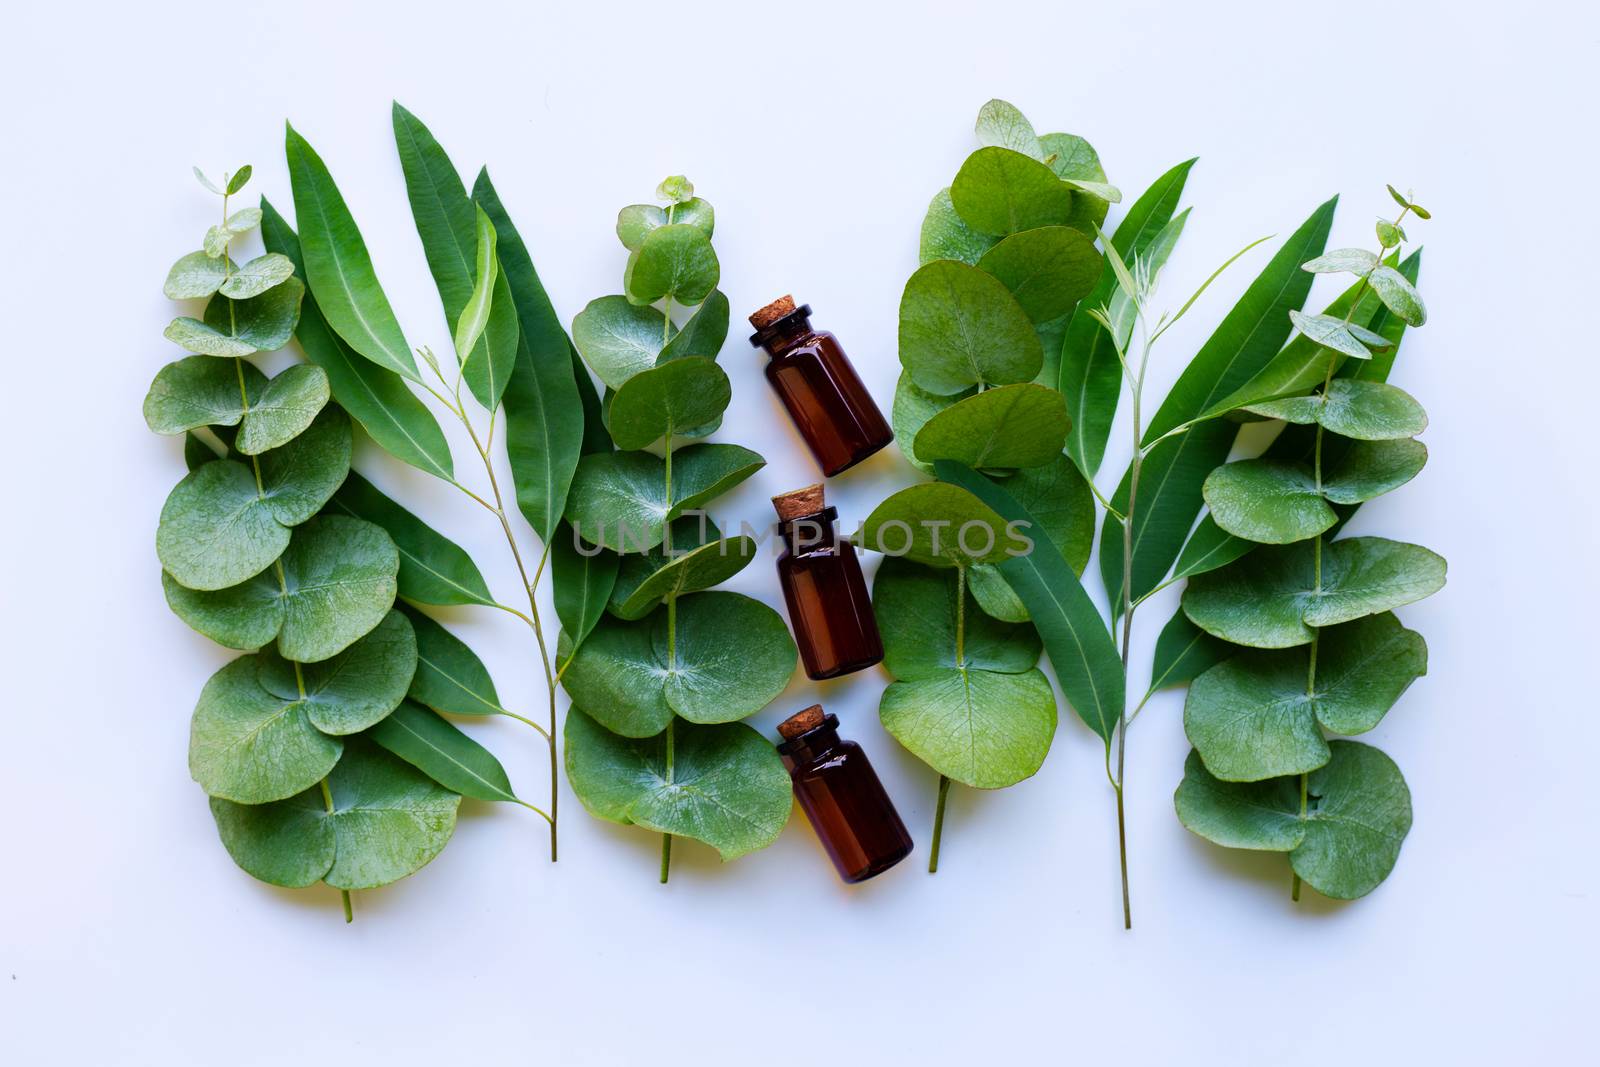 Eucalyptus essential oils with branches of eucalyptus  by Bowonpat